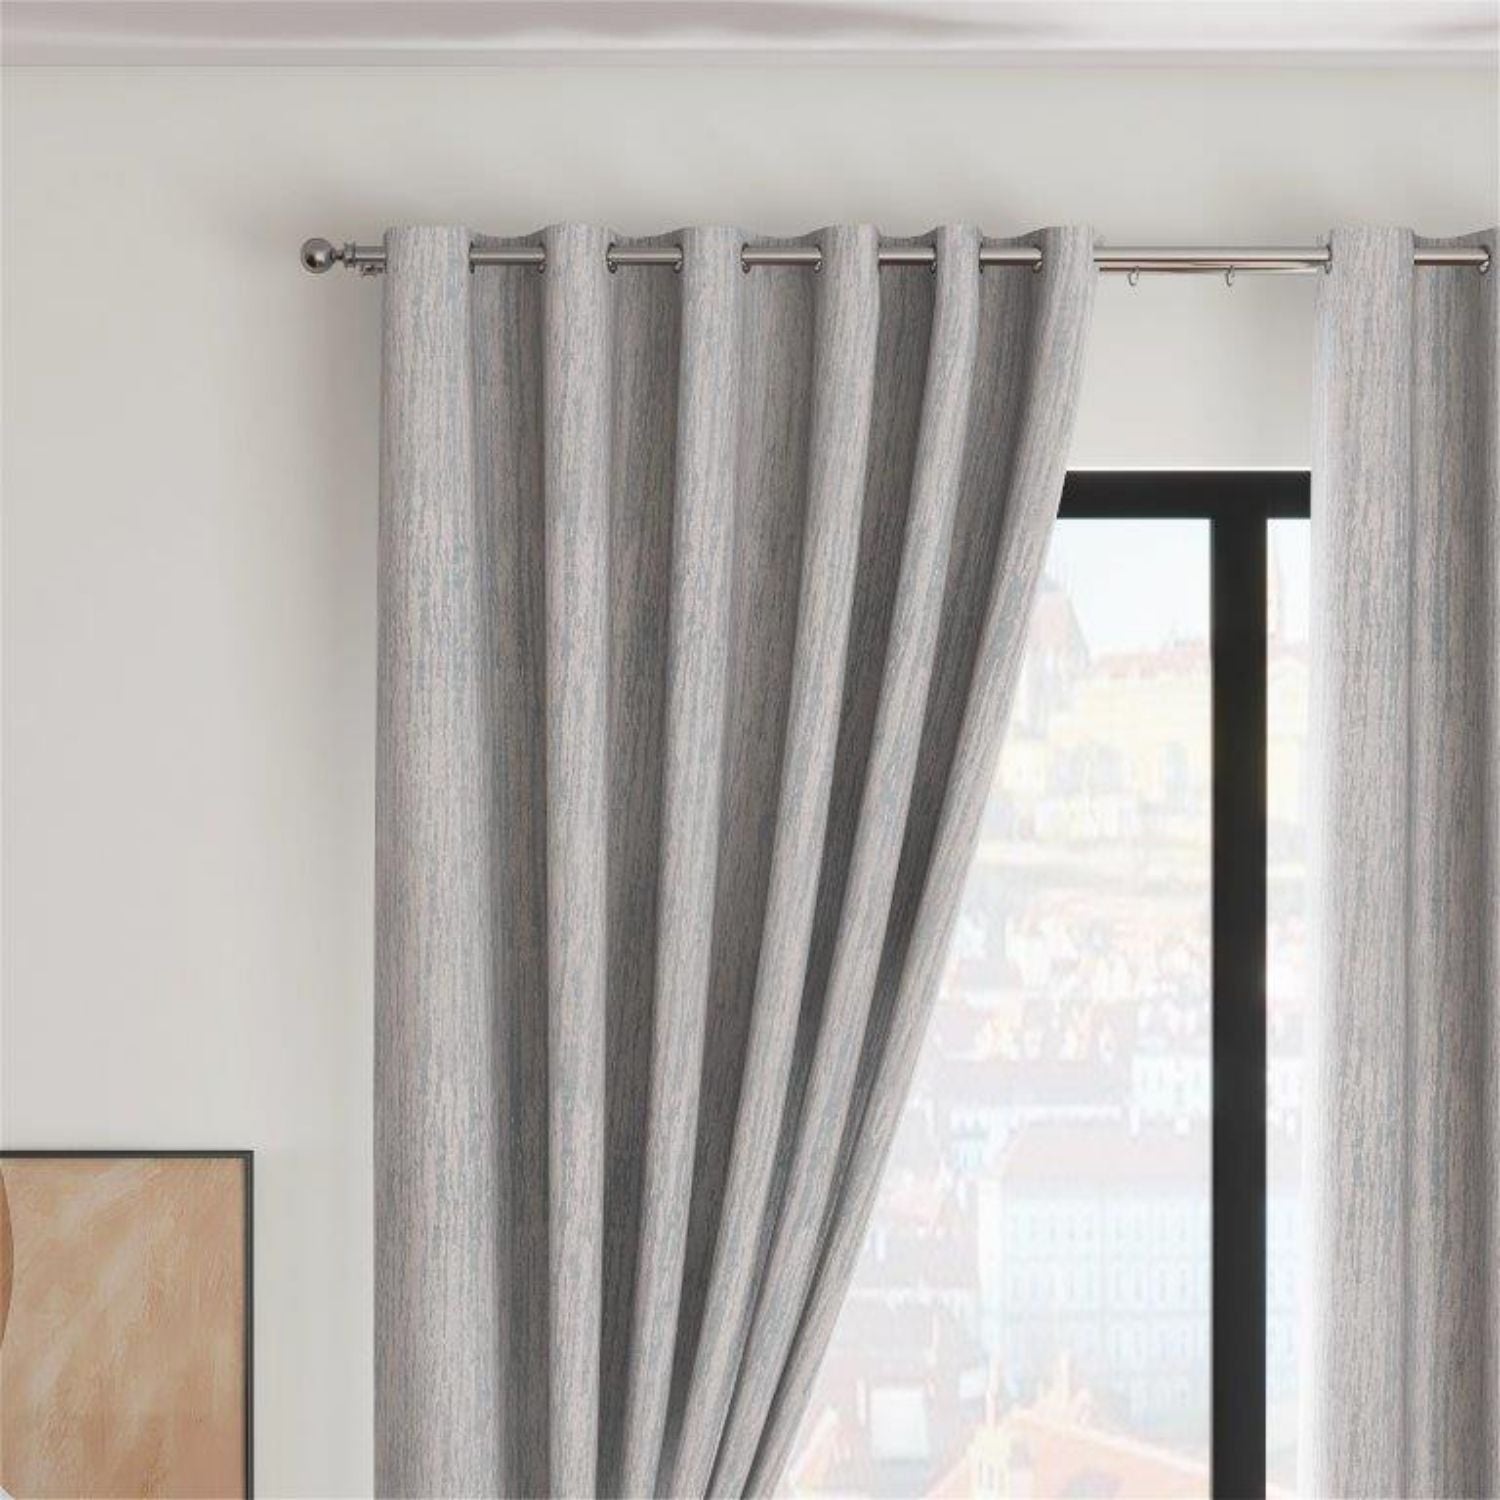 The Home Anton Curtains - Silver 2 Shaws Department Stores